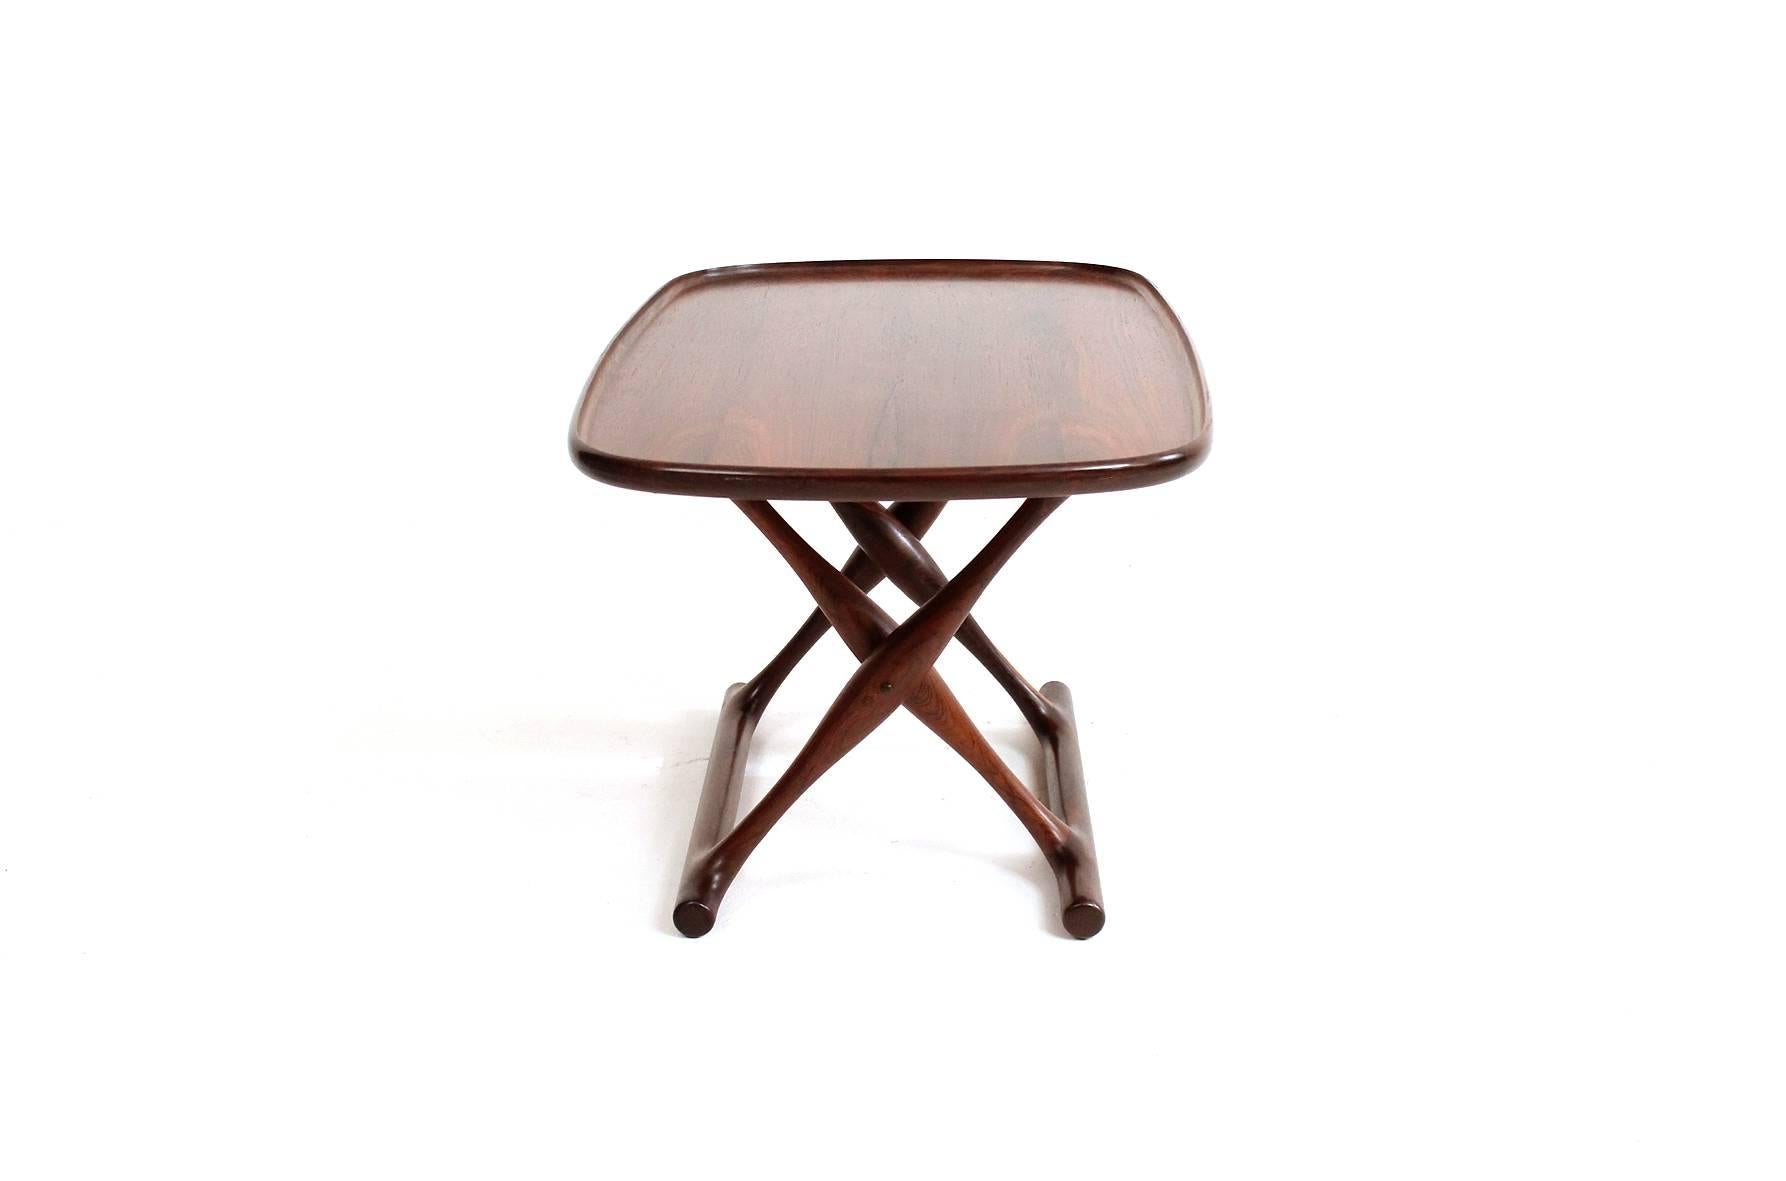 Guldhoj rosewood tray table and leather folding stool designed by Poul Hundevad. Finely grained rosewood table top and attractive patina to the brown leather of the folding stool.  Signed with the manufacturers decal to underneath of the tray top.